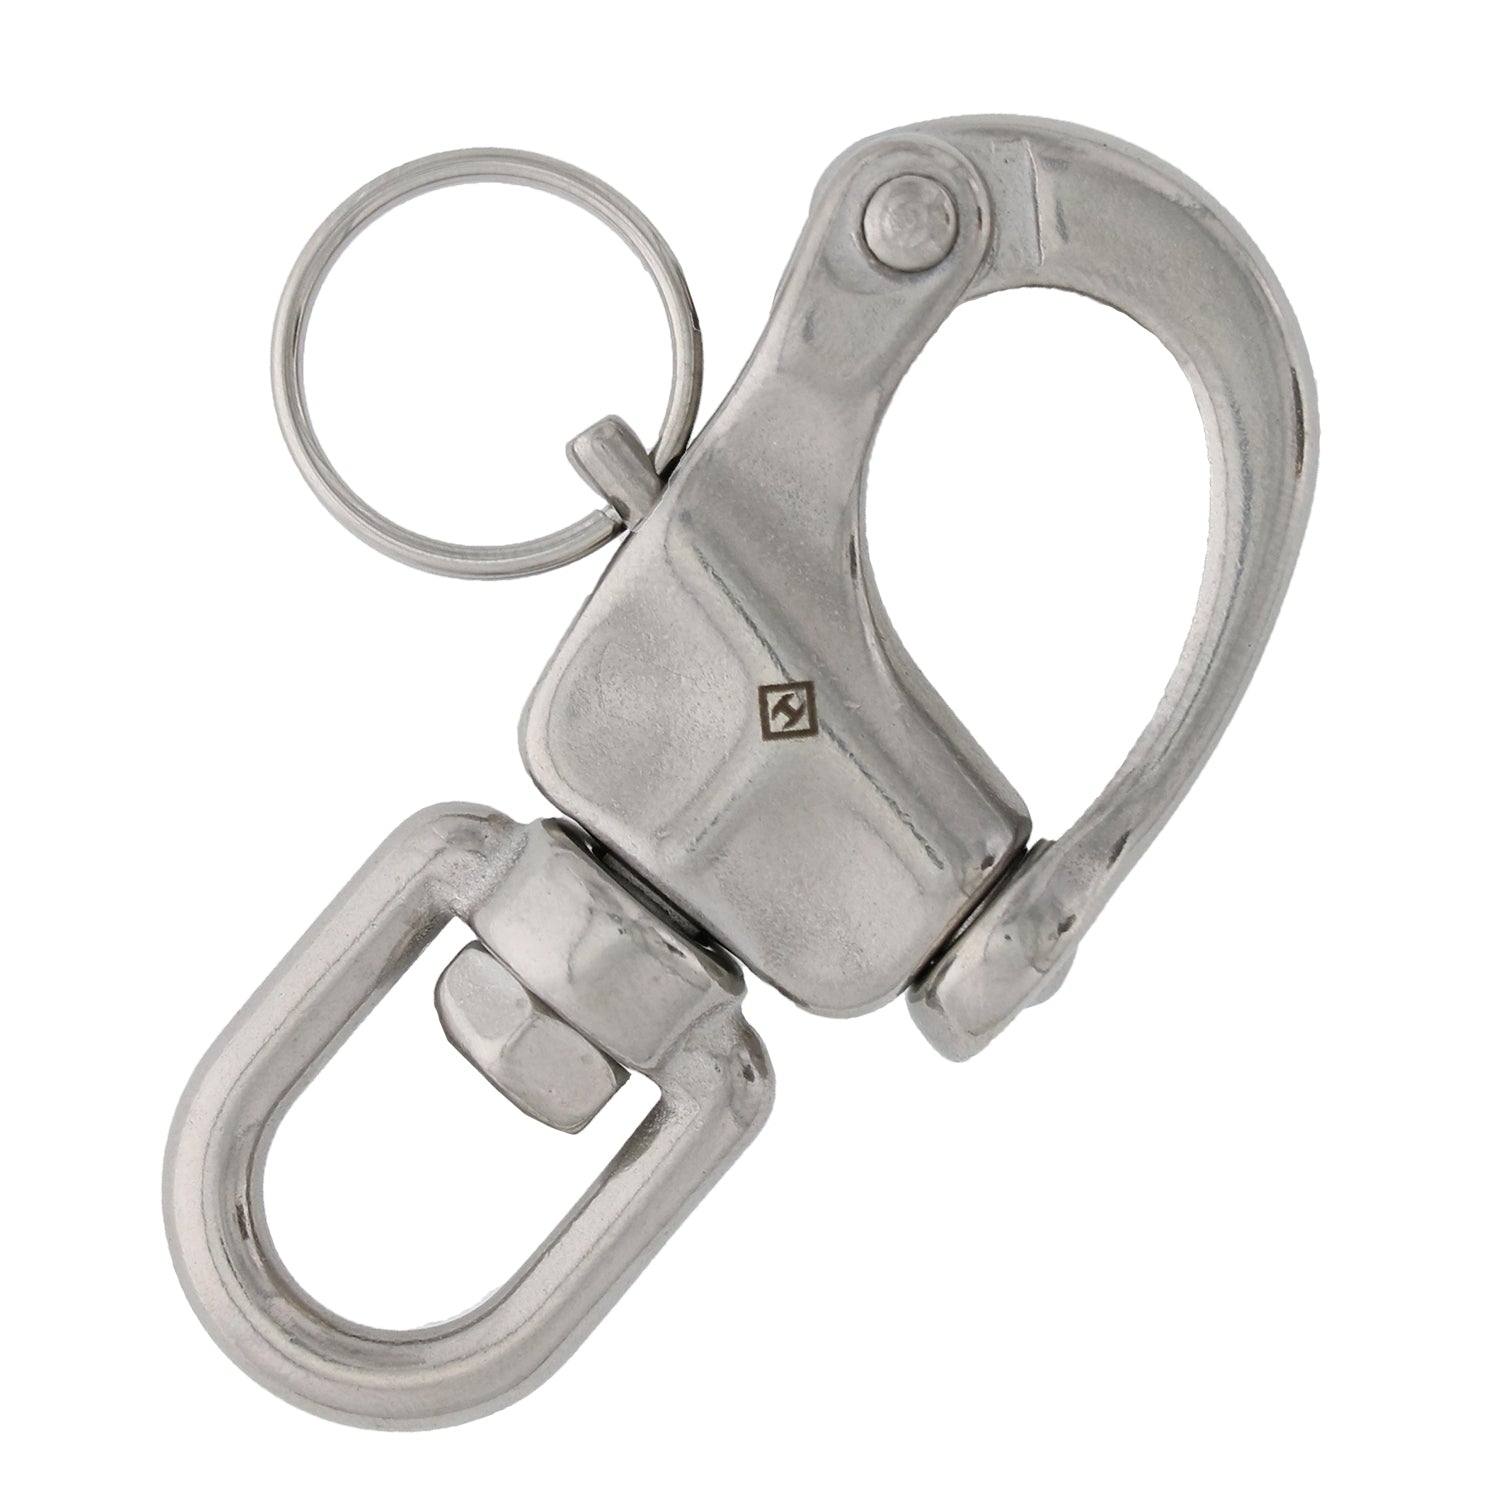 4Pieces 316 Stainless Steel 32mm Snap Shackle with Swivel Tack Bail 